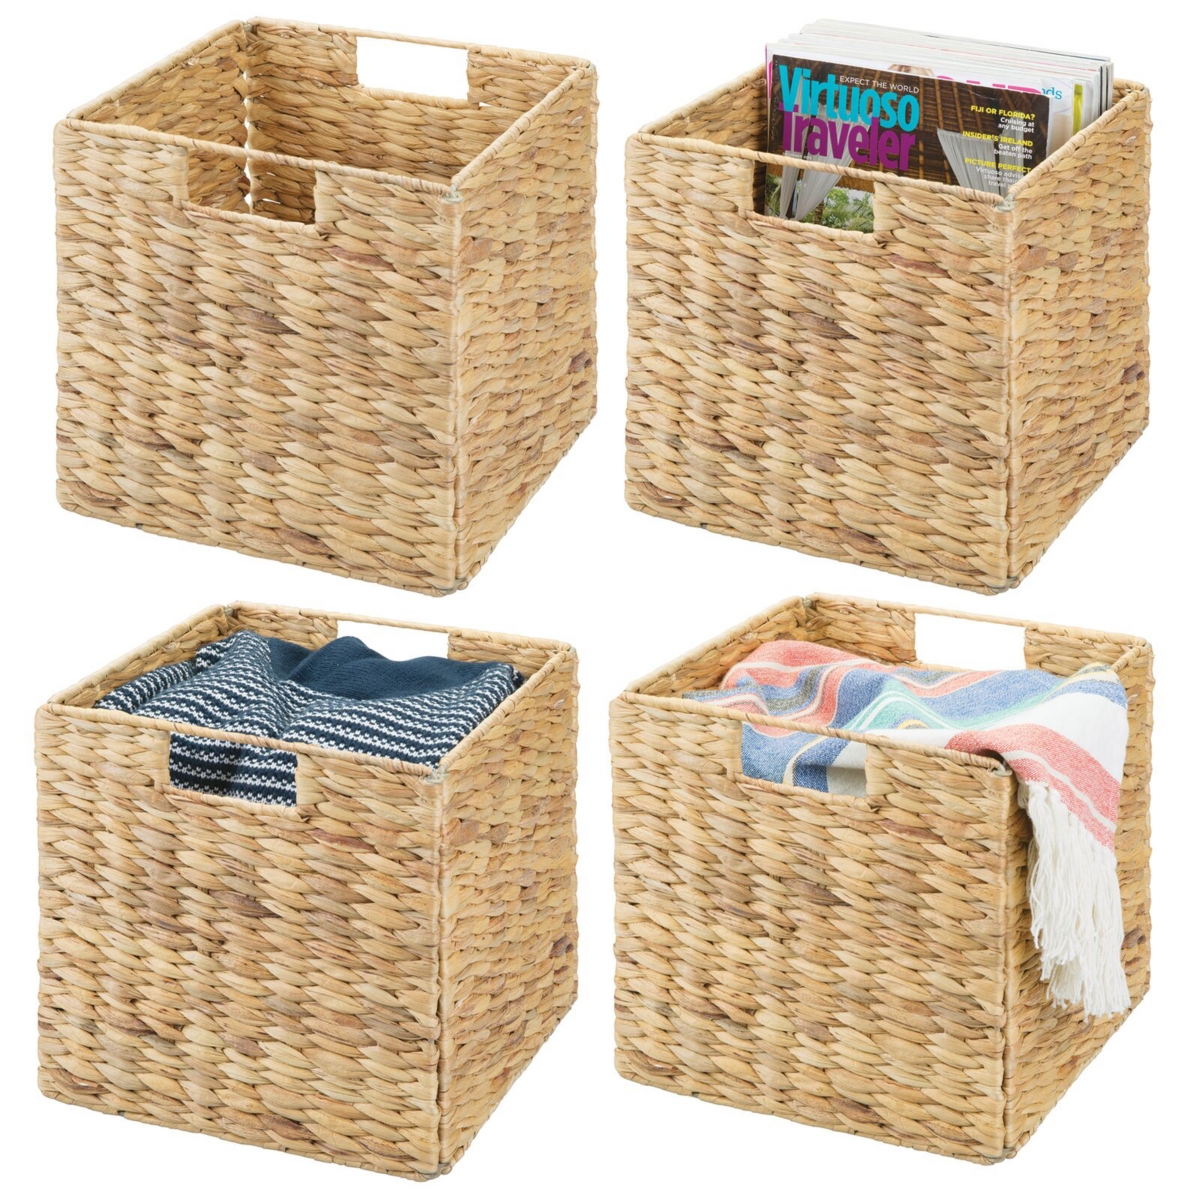 Woven Hyacinth Home Storage Basket for Cube Furniture, 4 Pack - Natural